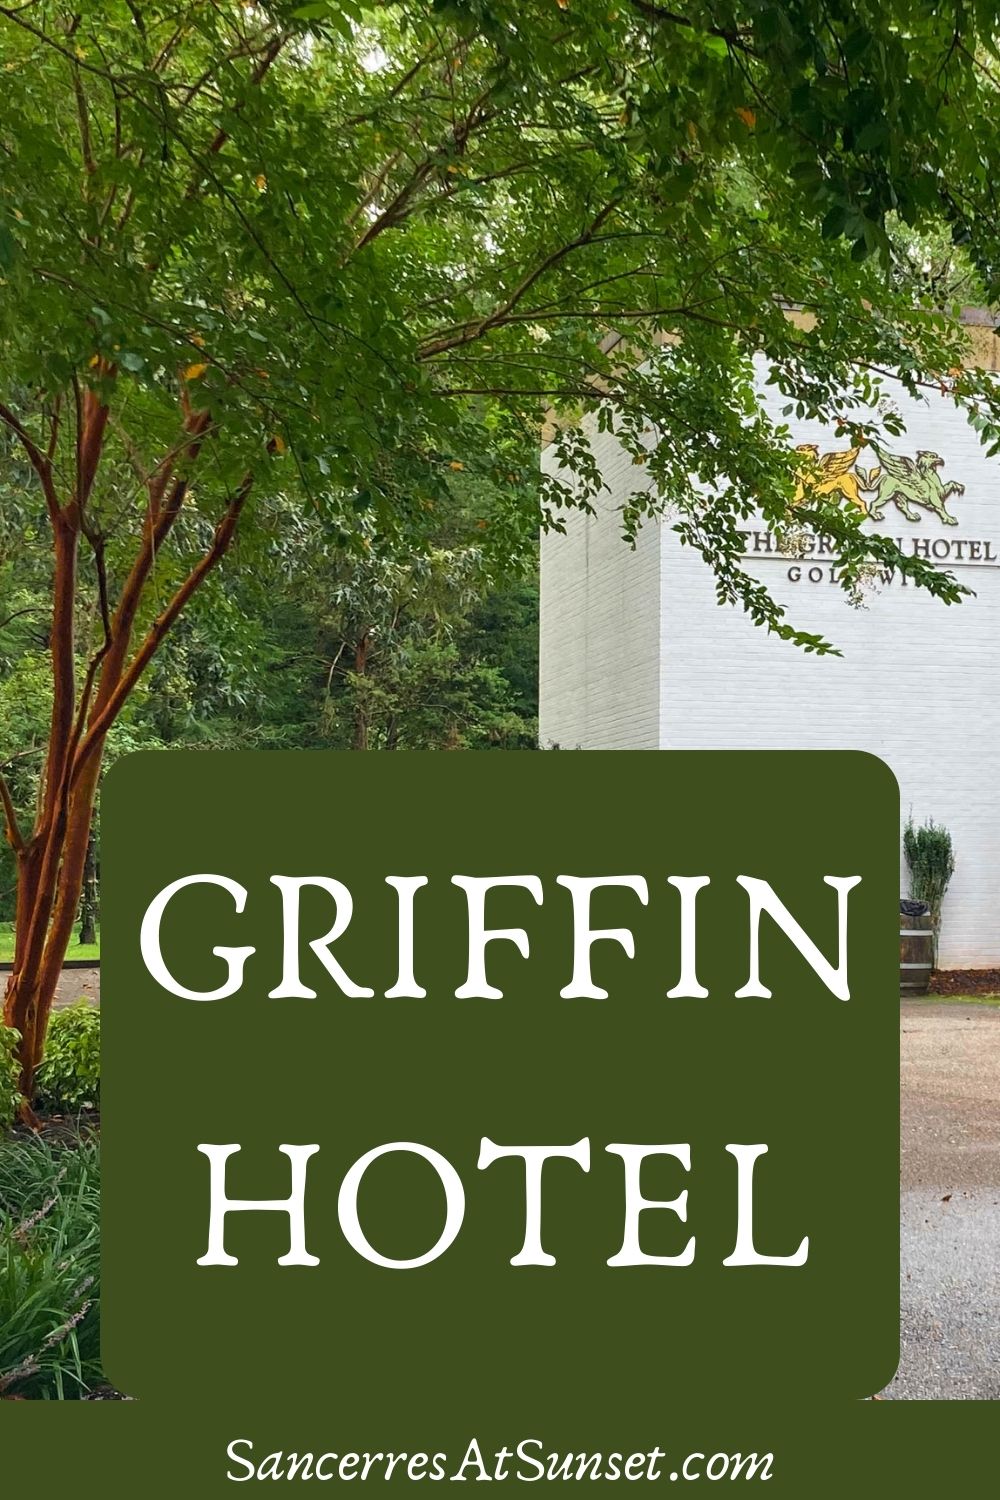 Griffin Hotel in Colonial Williamsburg